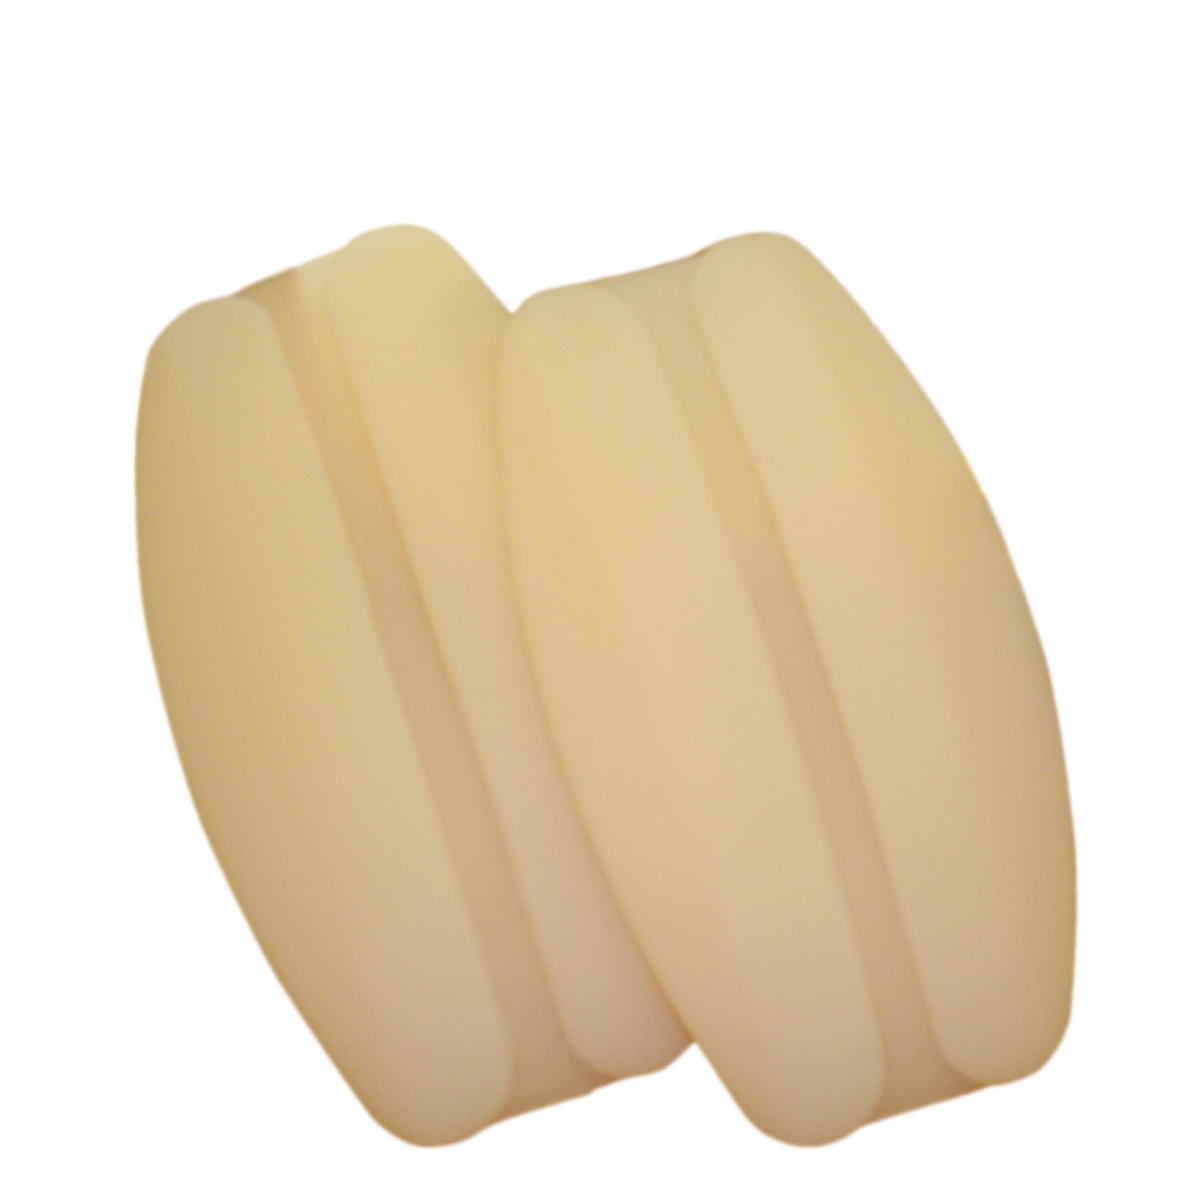 92600-nude Soft Silicone Bra Strap Cushion For Ease Shoulder Discomfort - Nude